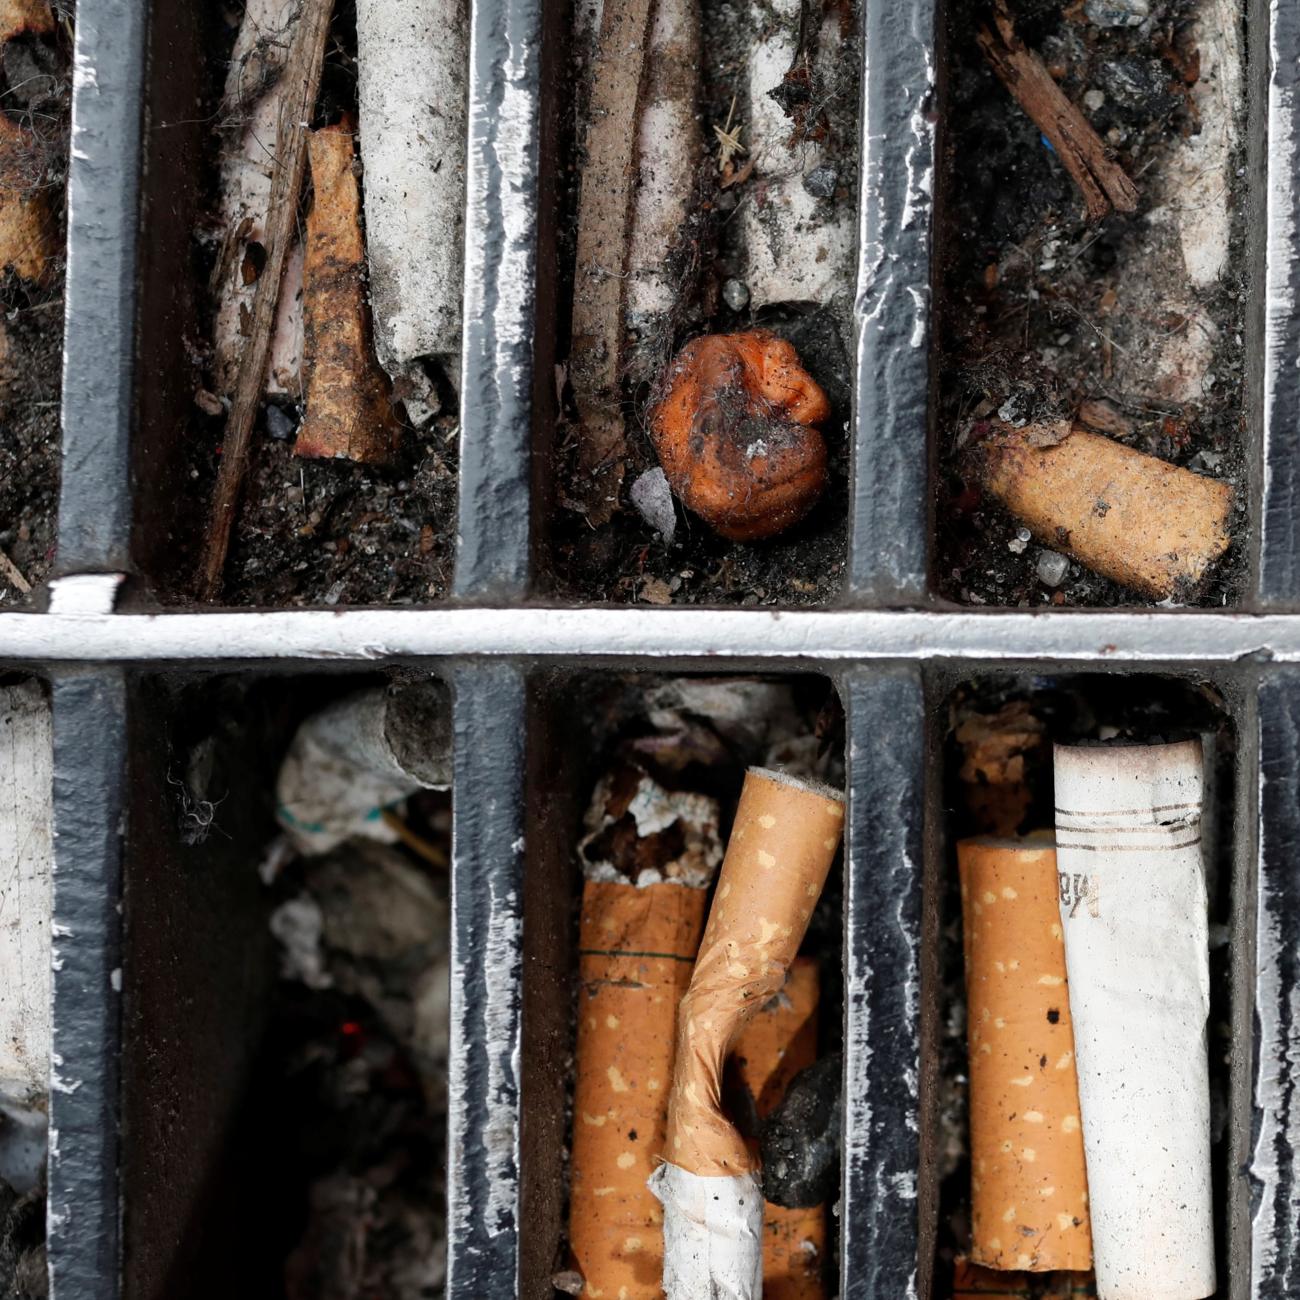 Discarded cigarette butts are seen lodged in a sidewalk grating in Manhattan.